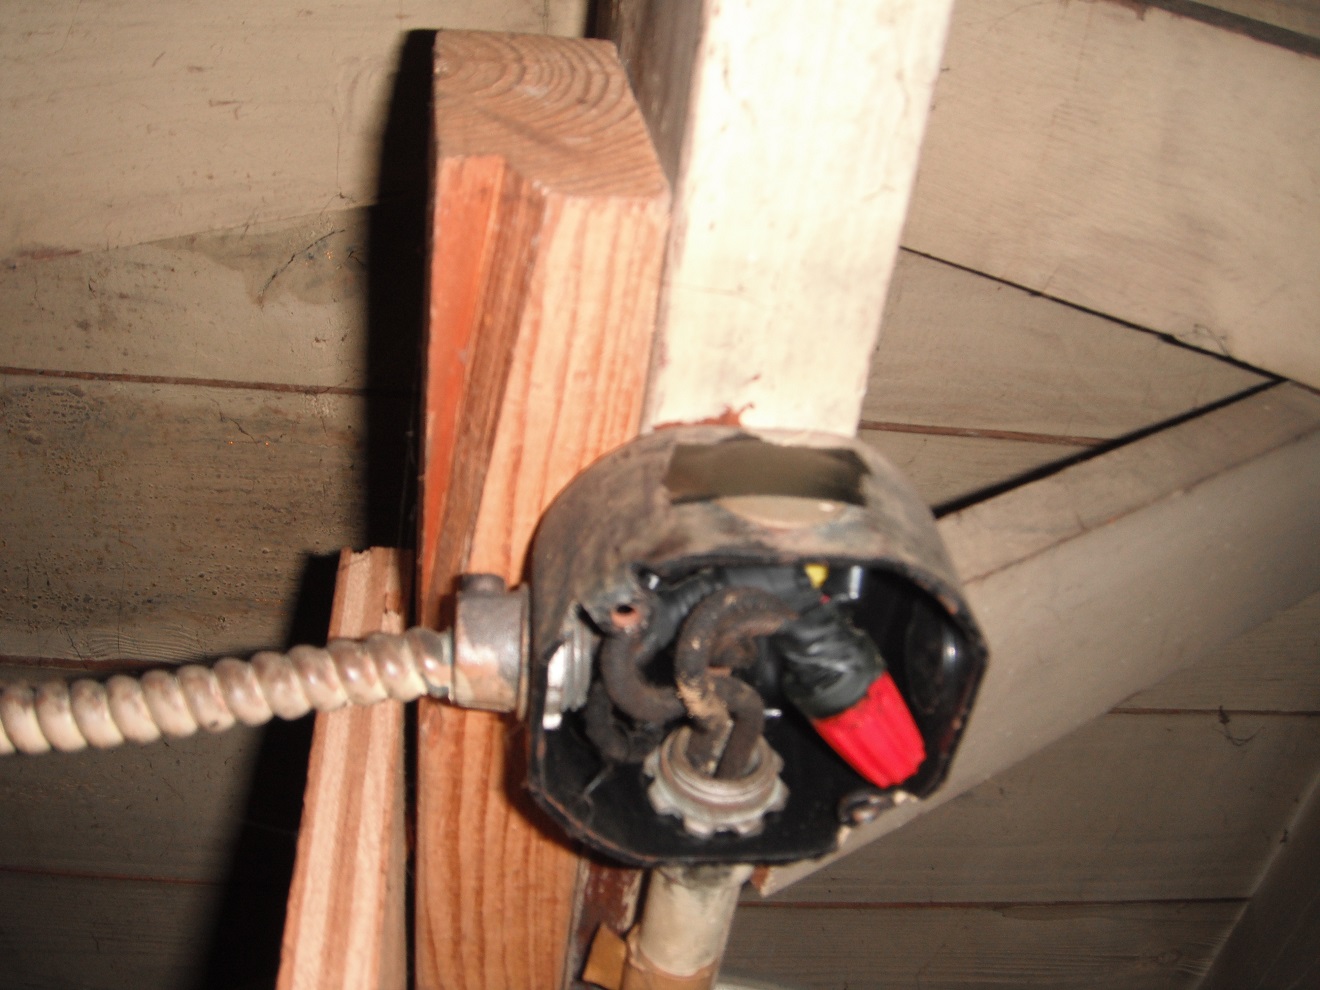 Old cloth covered wires with a open electrical junction box. "South Holland Home Inspector Photo"